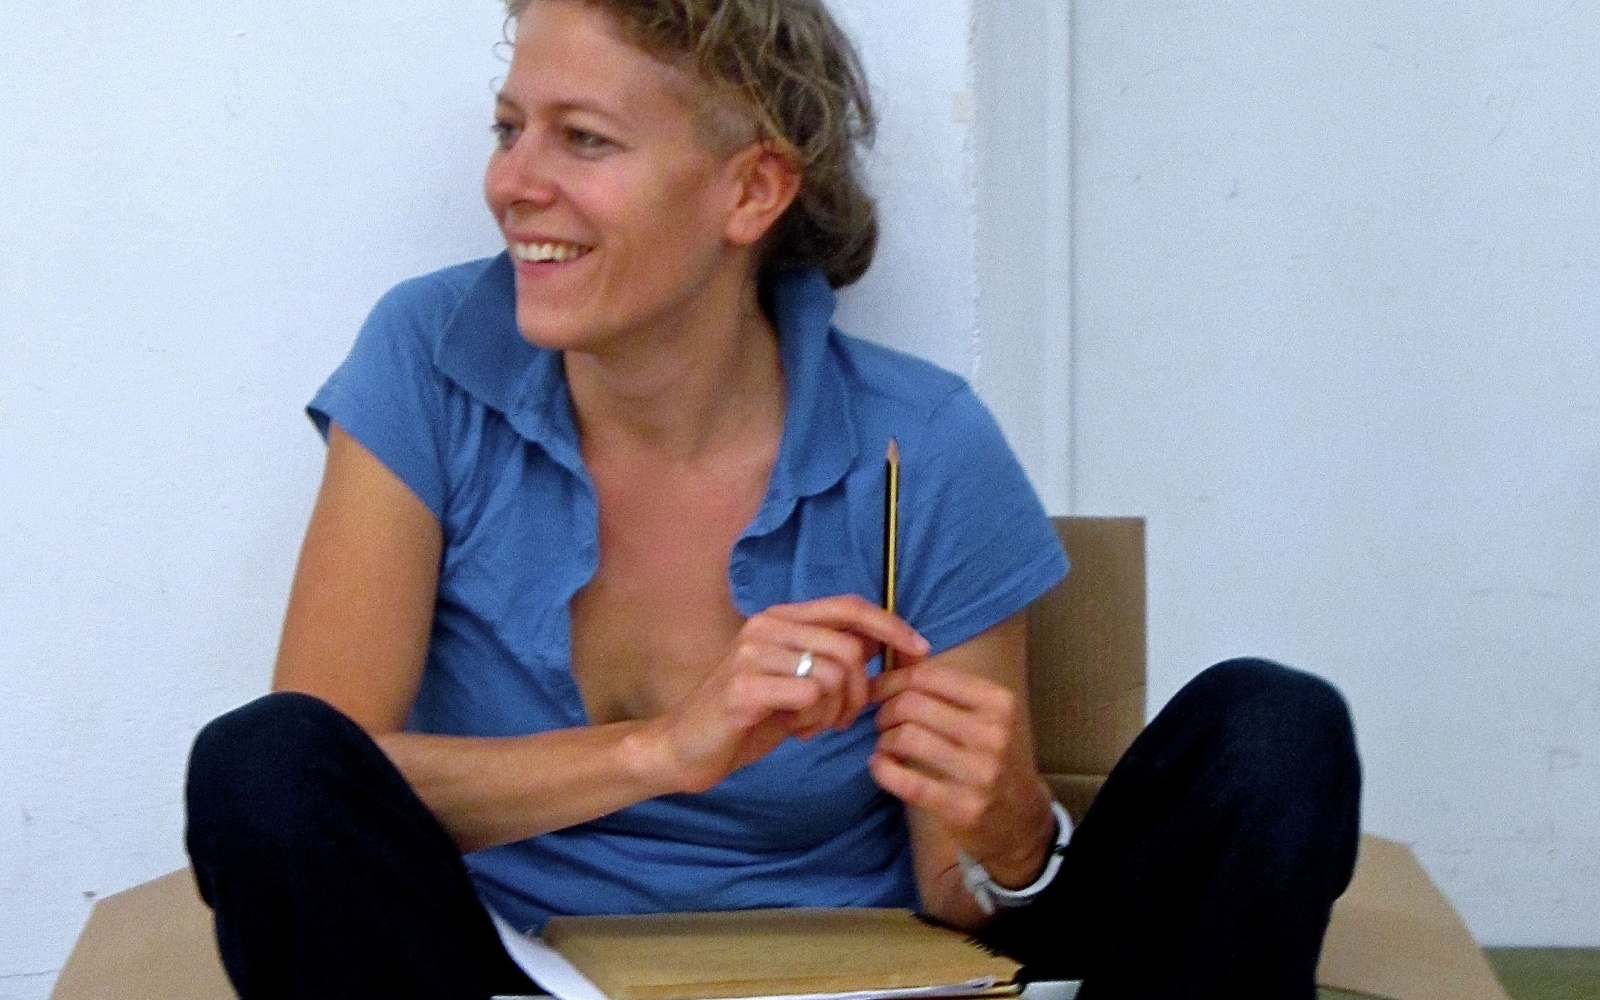  Anja Konjetzky sits casually in a cardboard box and holds a pencil in her hand.